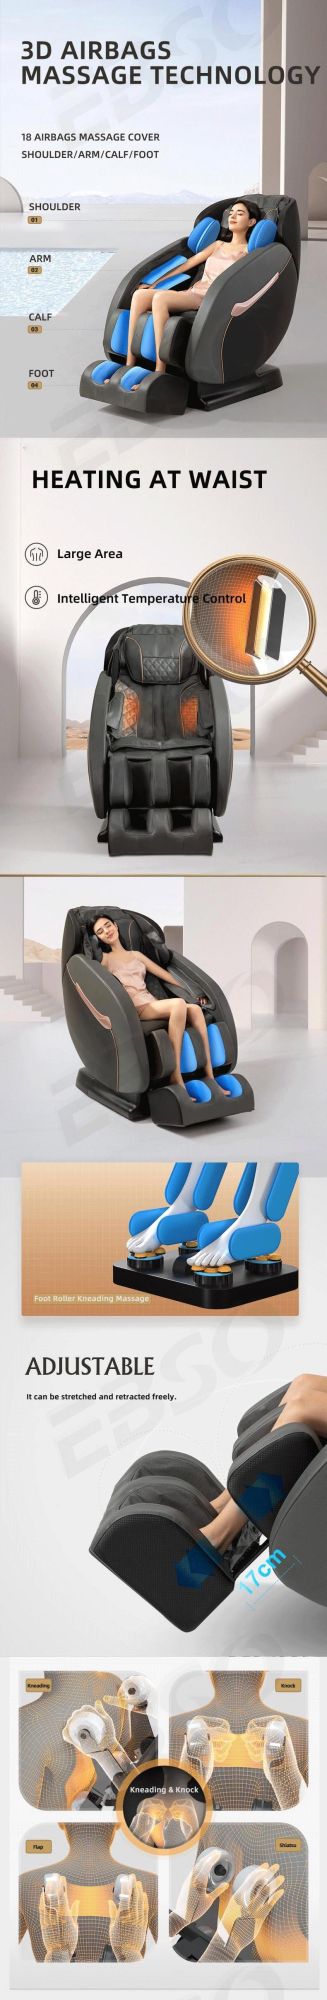 Ksm-Mc1 Brown Zero Gravity Human Touch Stretch 4D Latest Electronic Massage Chair for Wheelchair People Body Massager Chair